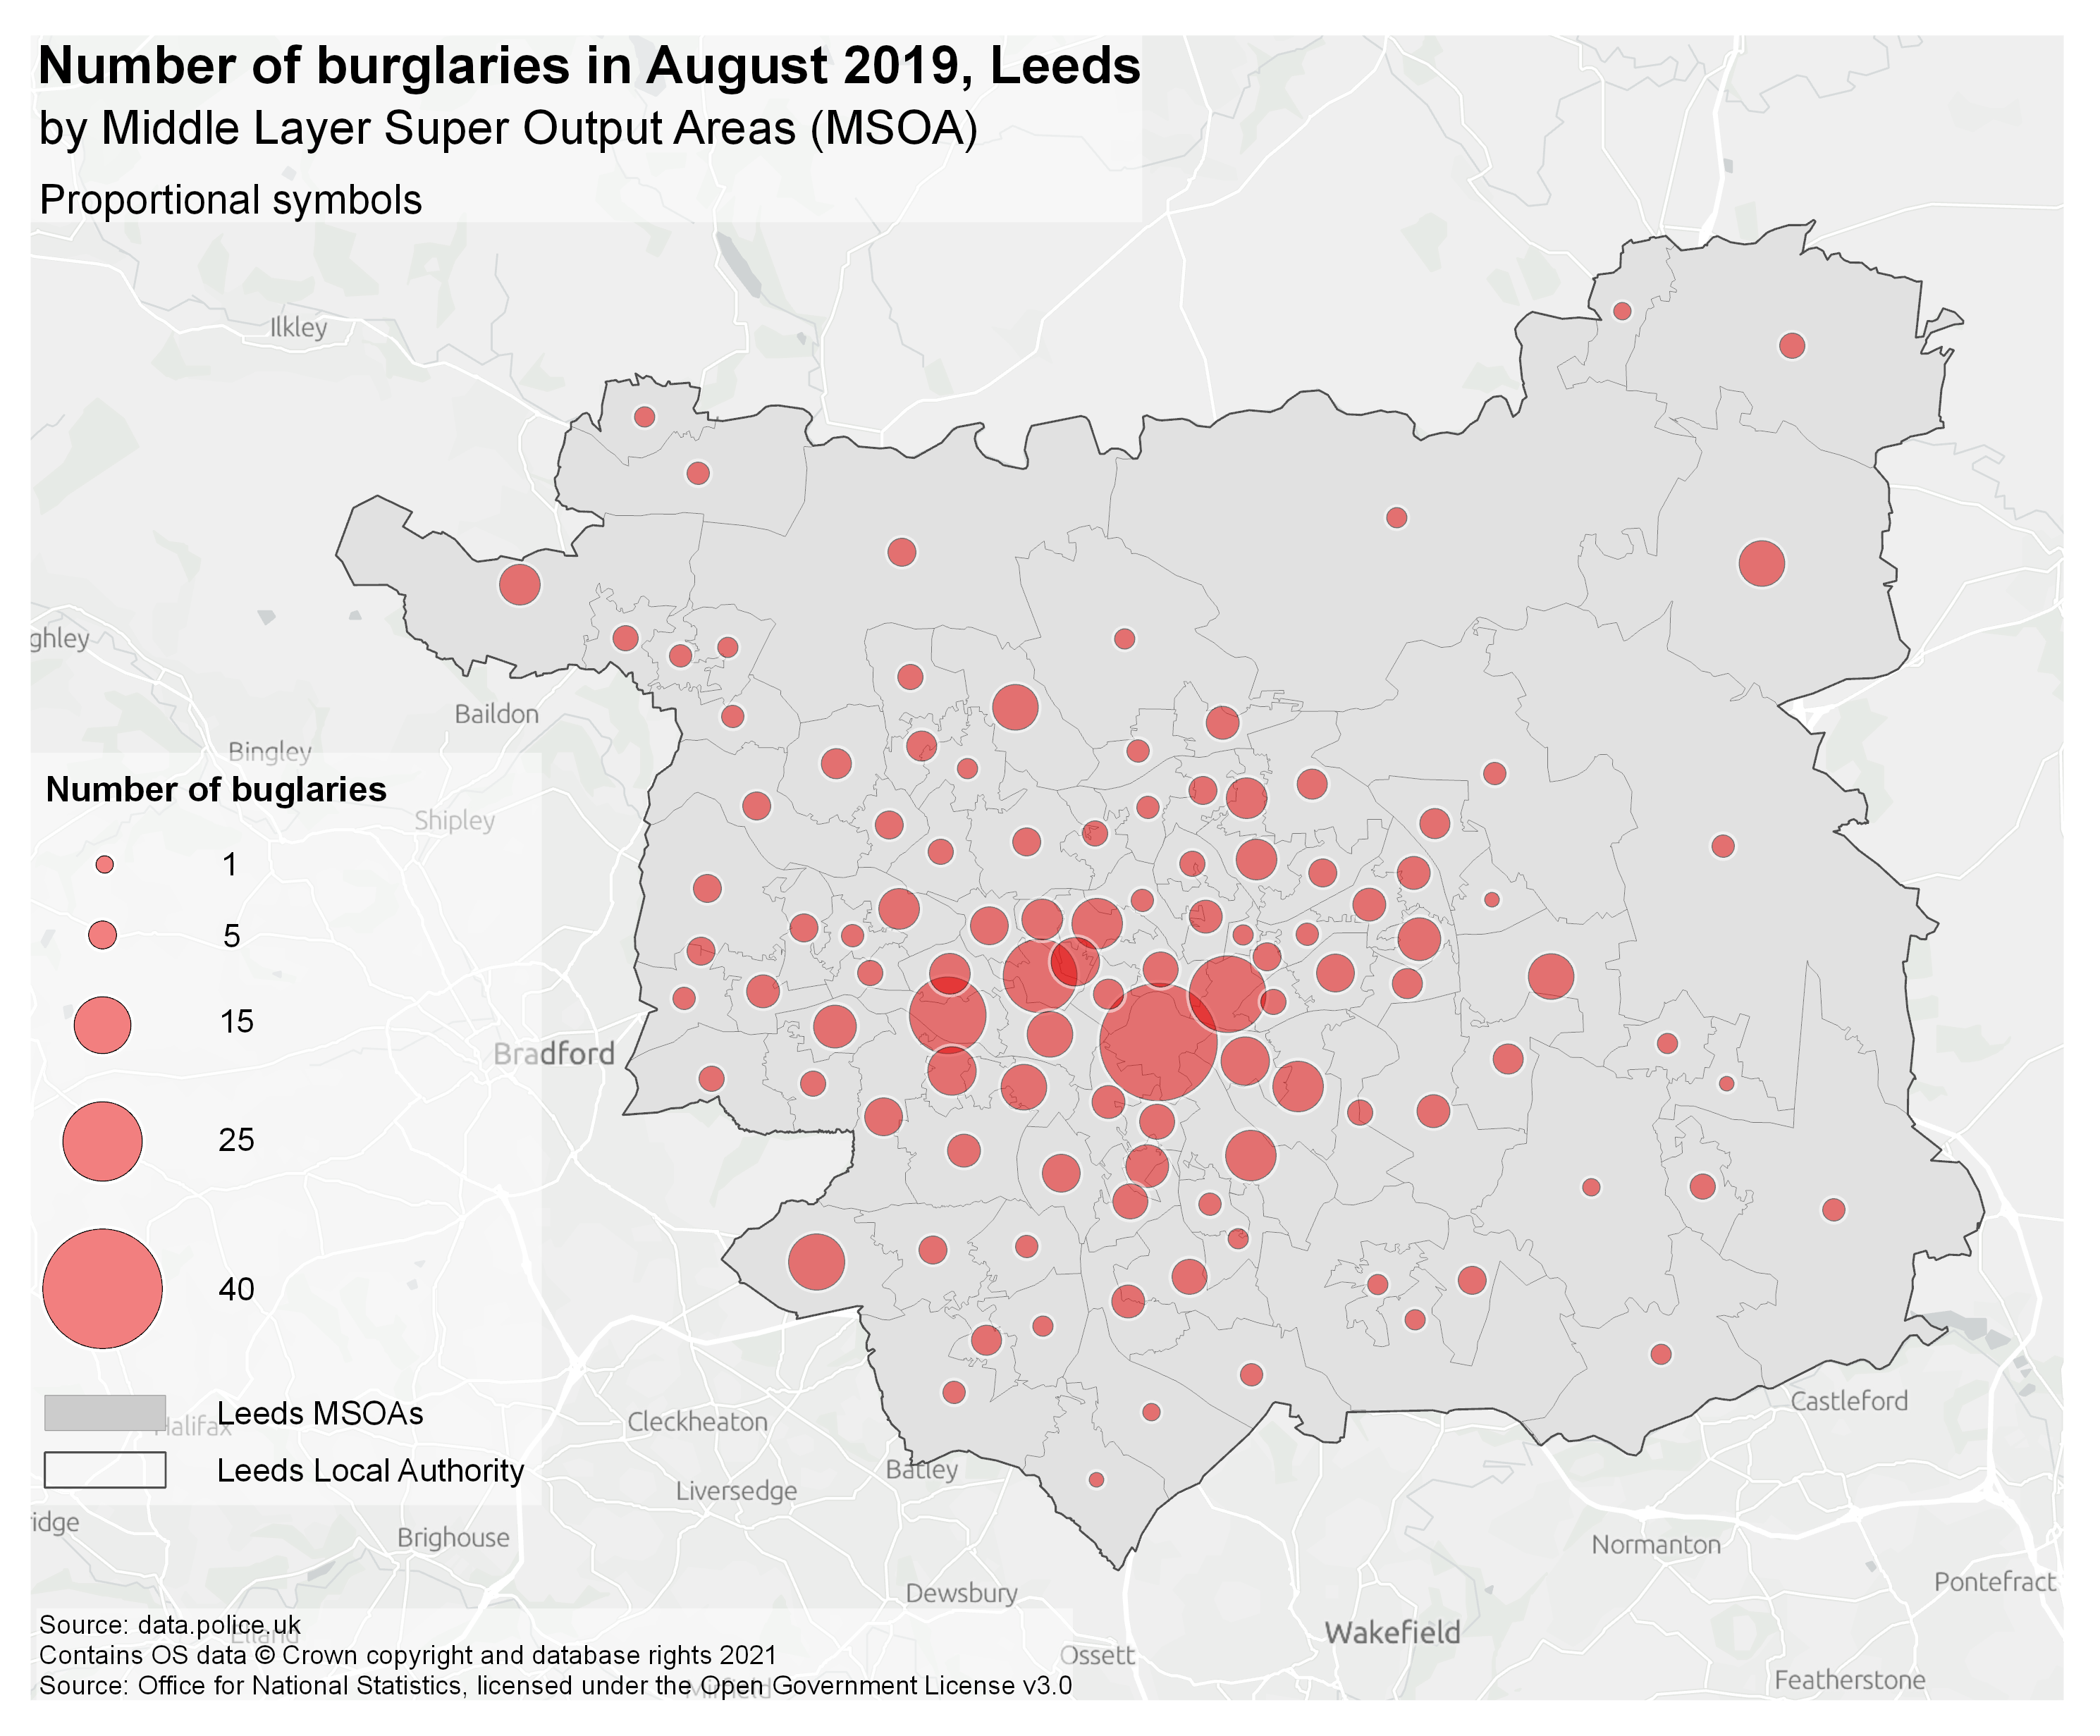 A proportional symbol map of burglary rates in London MSOAs